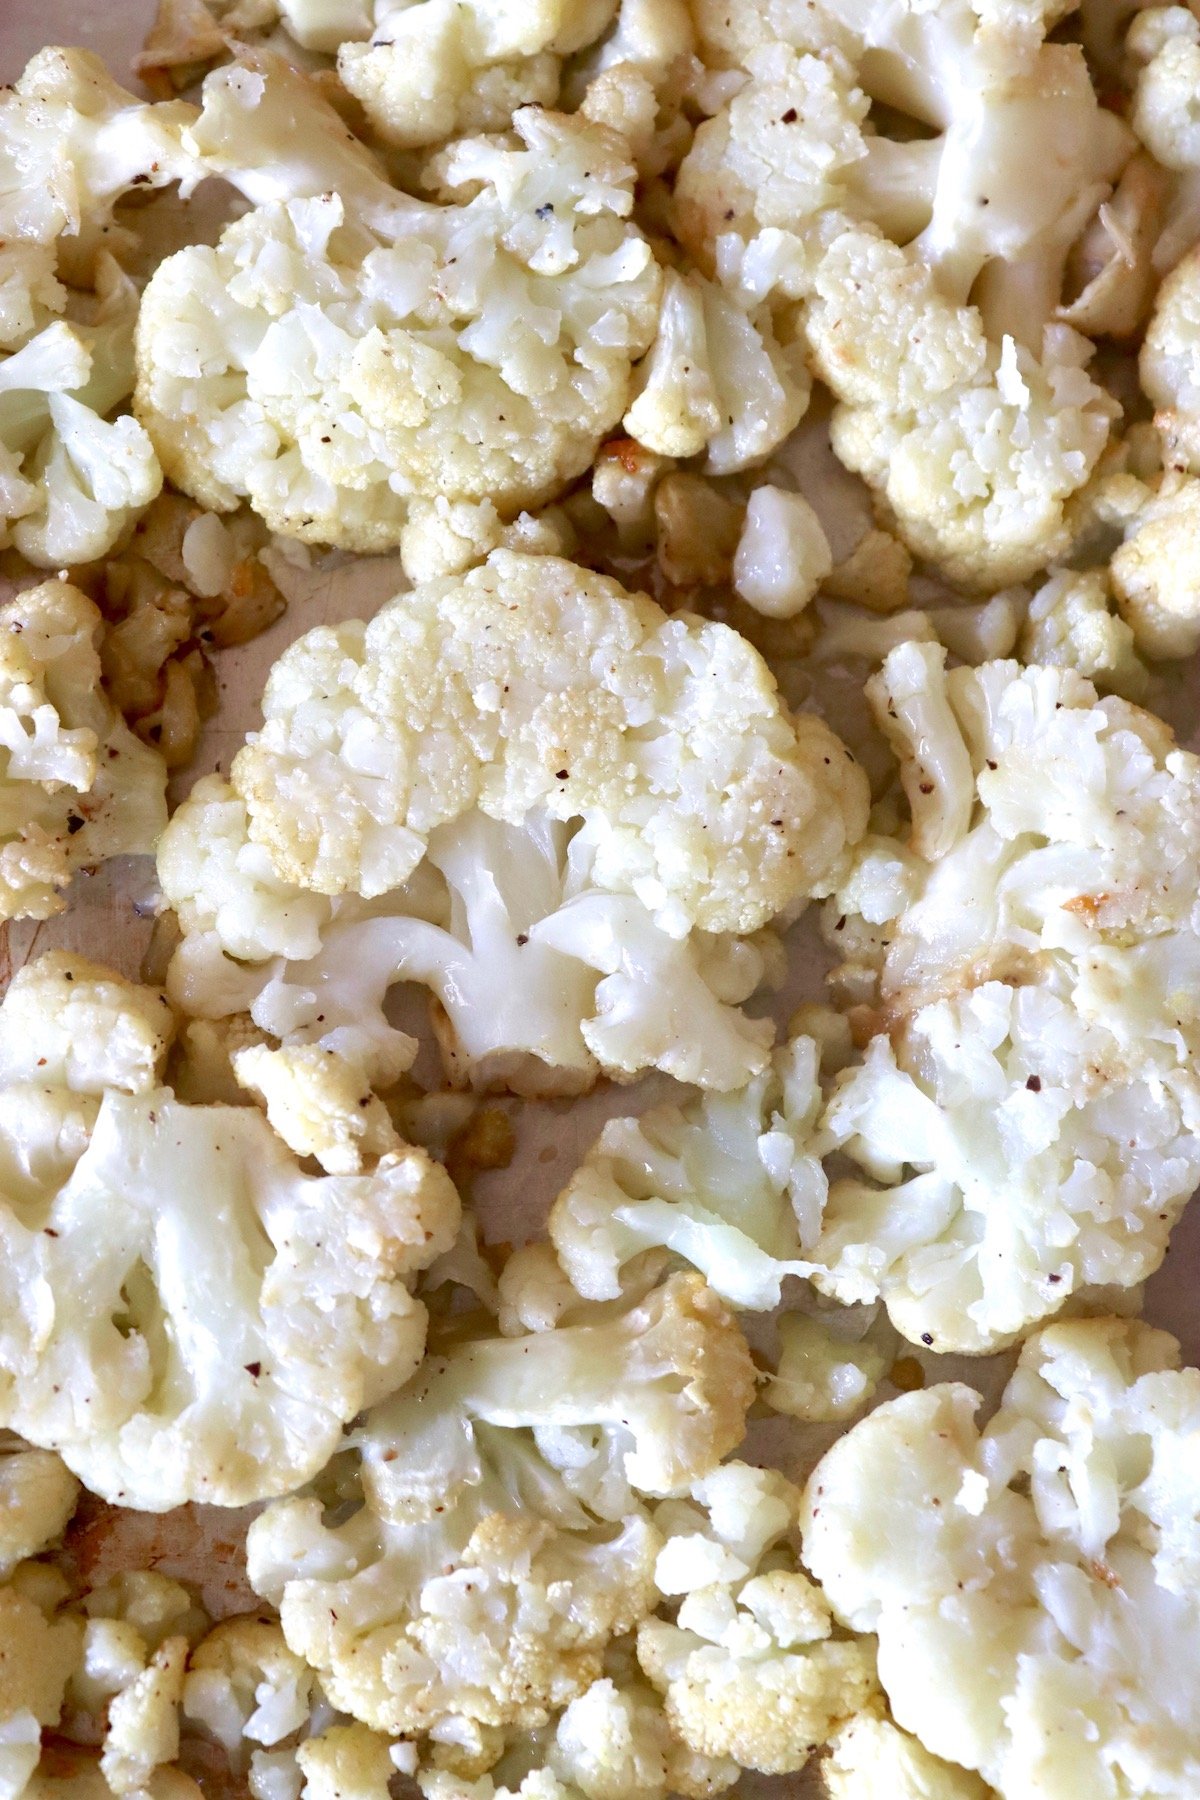 Sheet pan filled with flattened pieces of cauliflower.